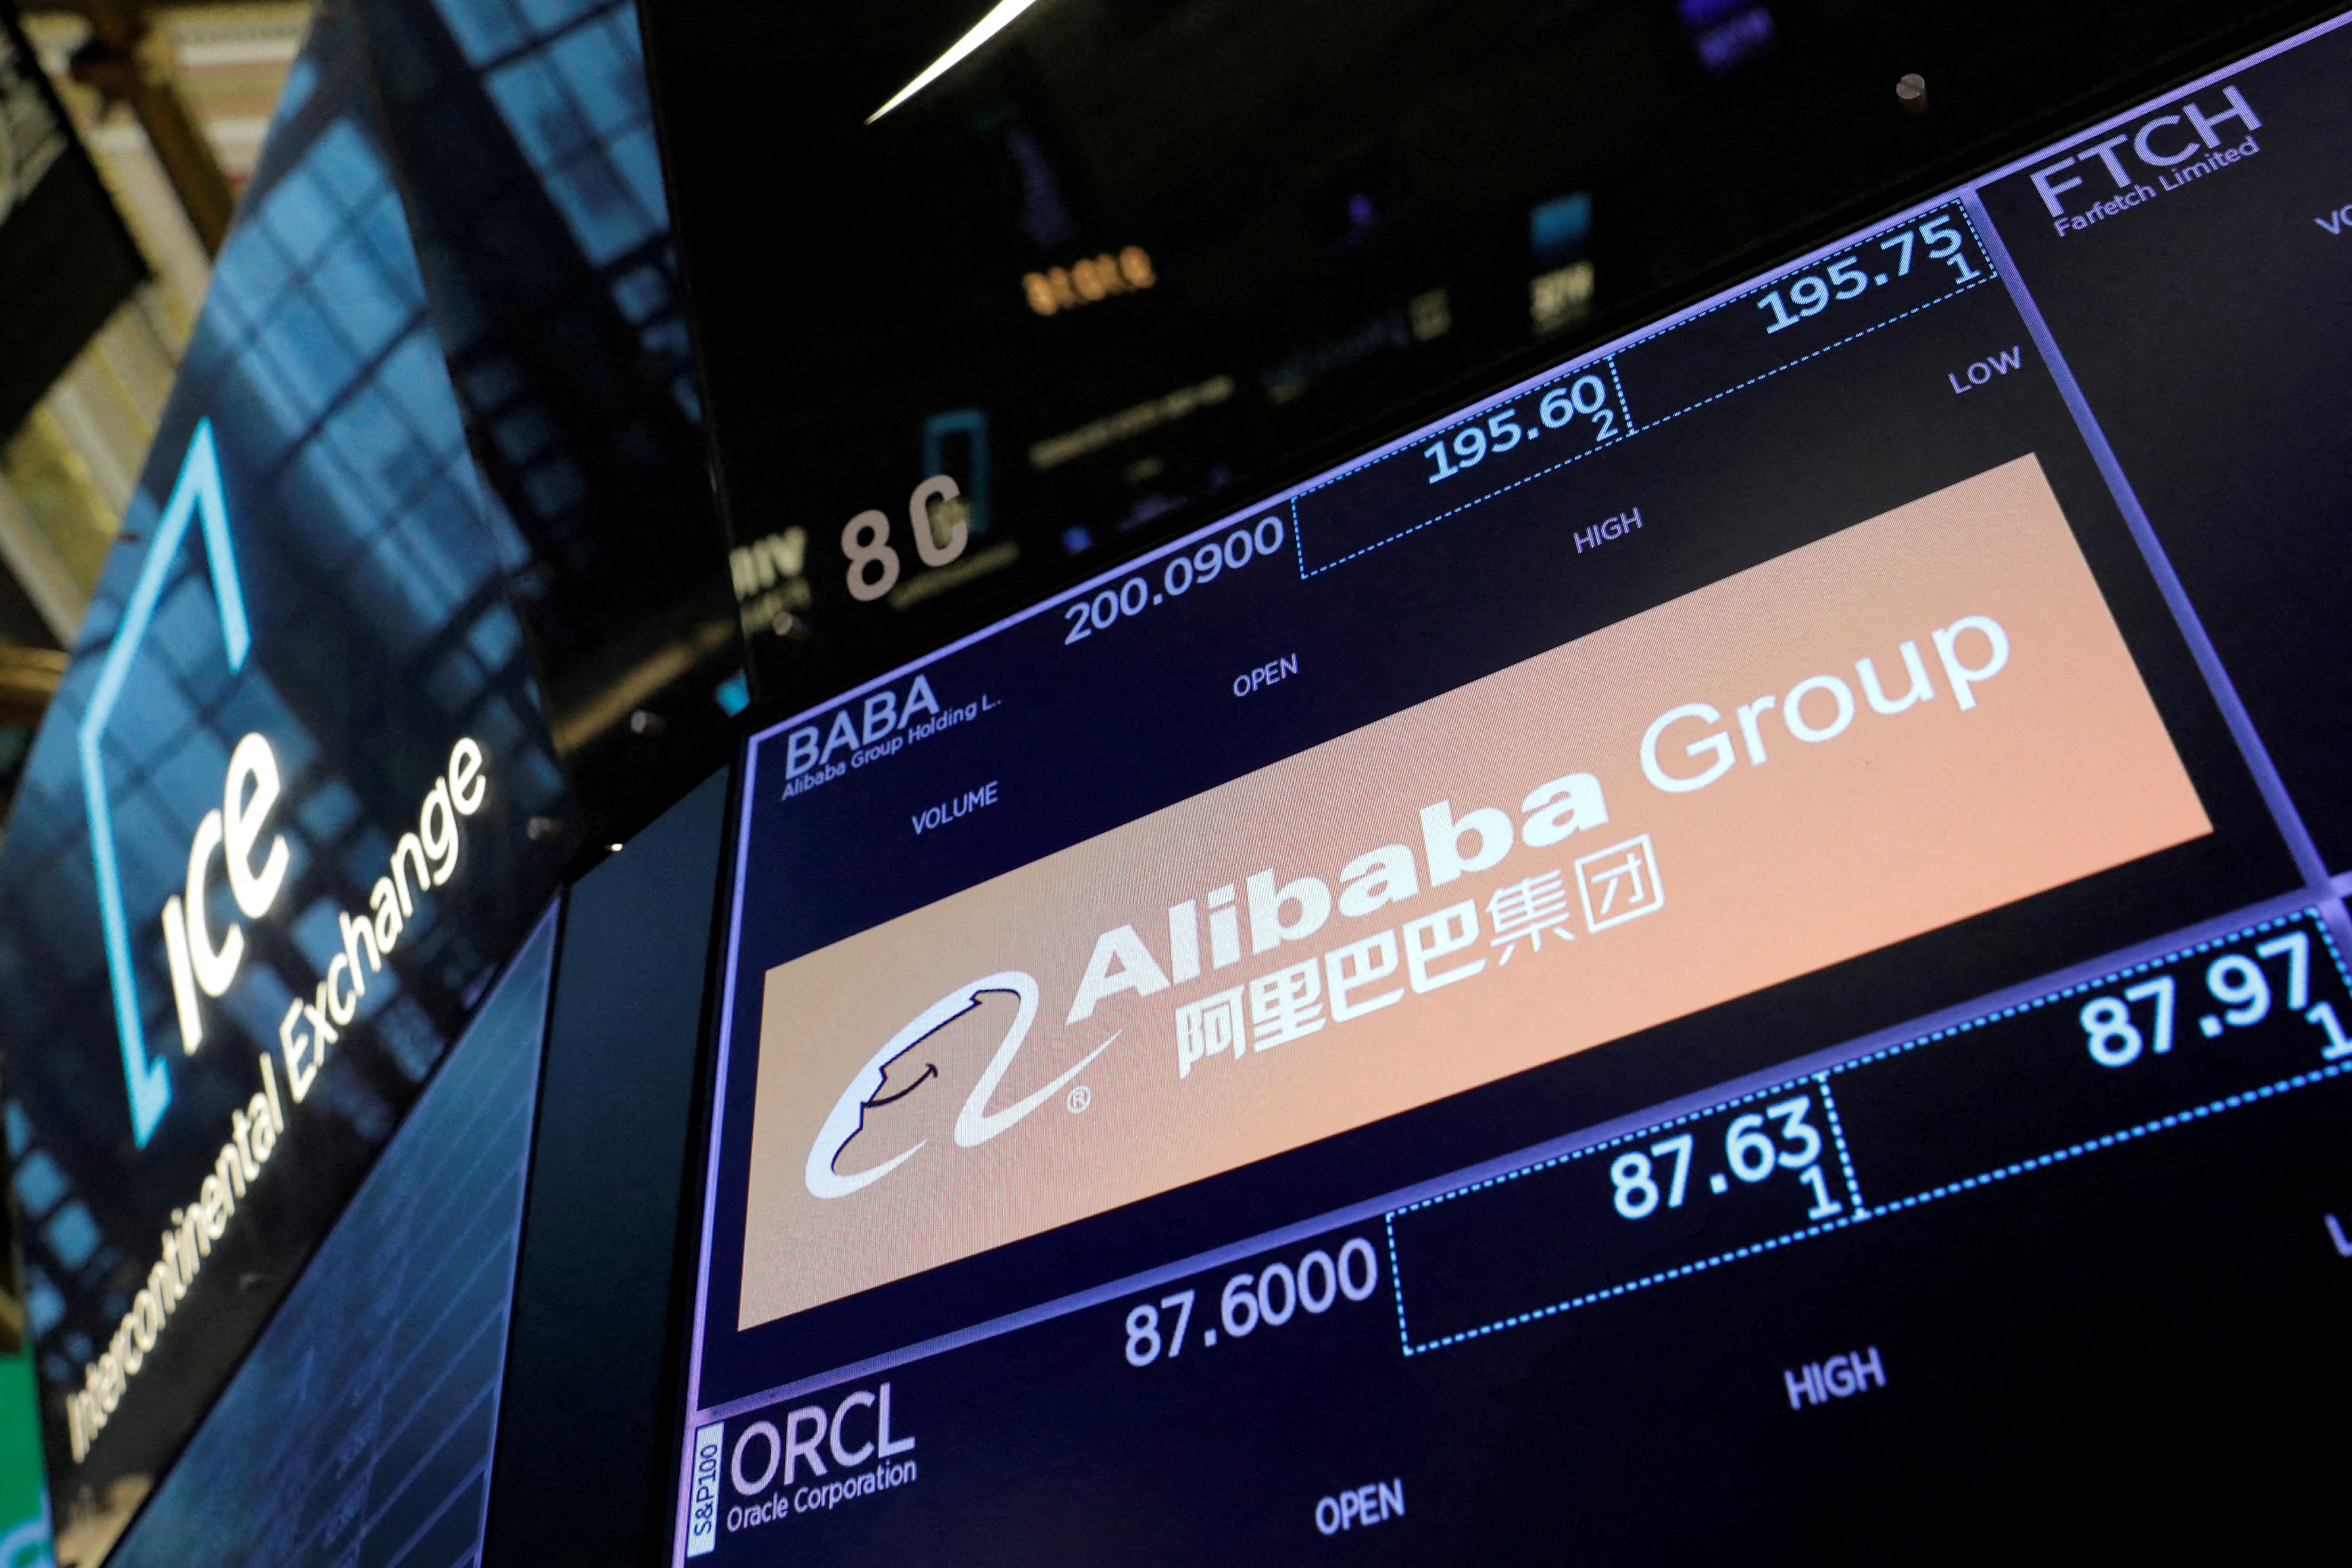 The logo for Alibaba Group is seen on the trading floor at the New York Stock Exchange (NYSE) in Manhattan, New York City